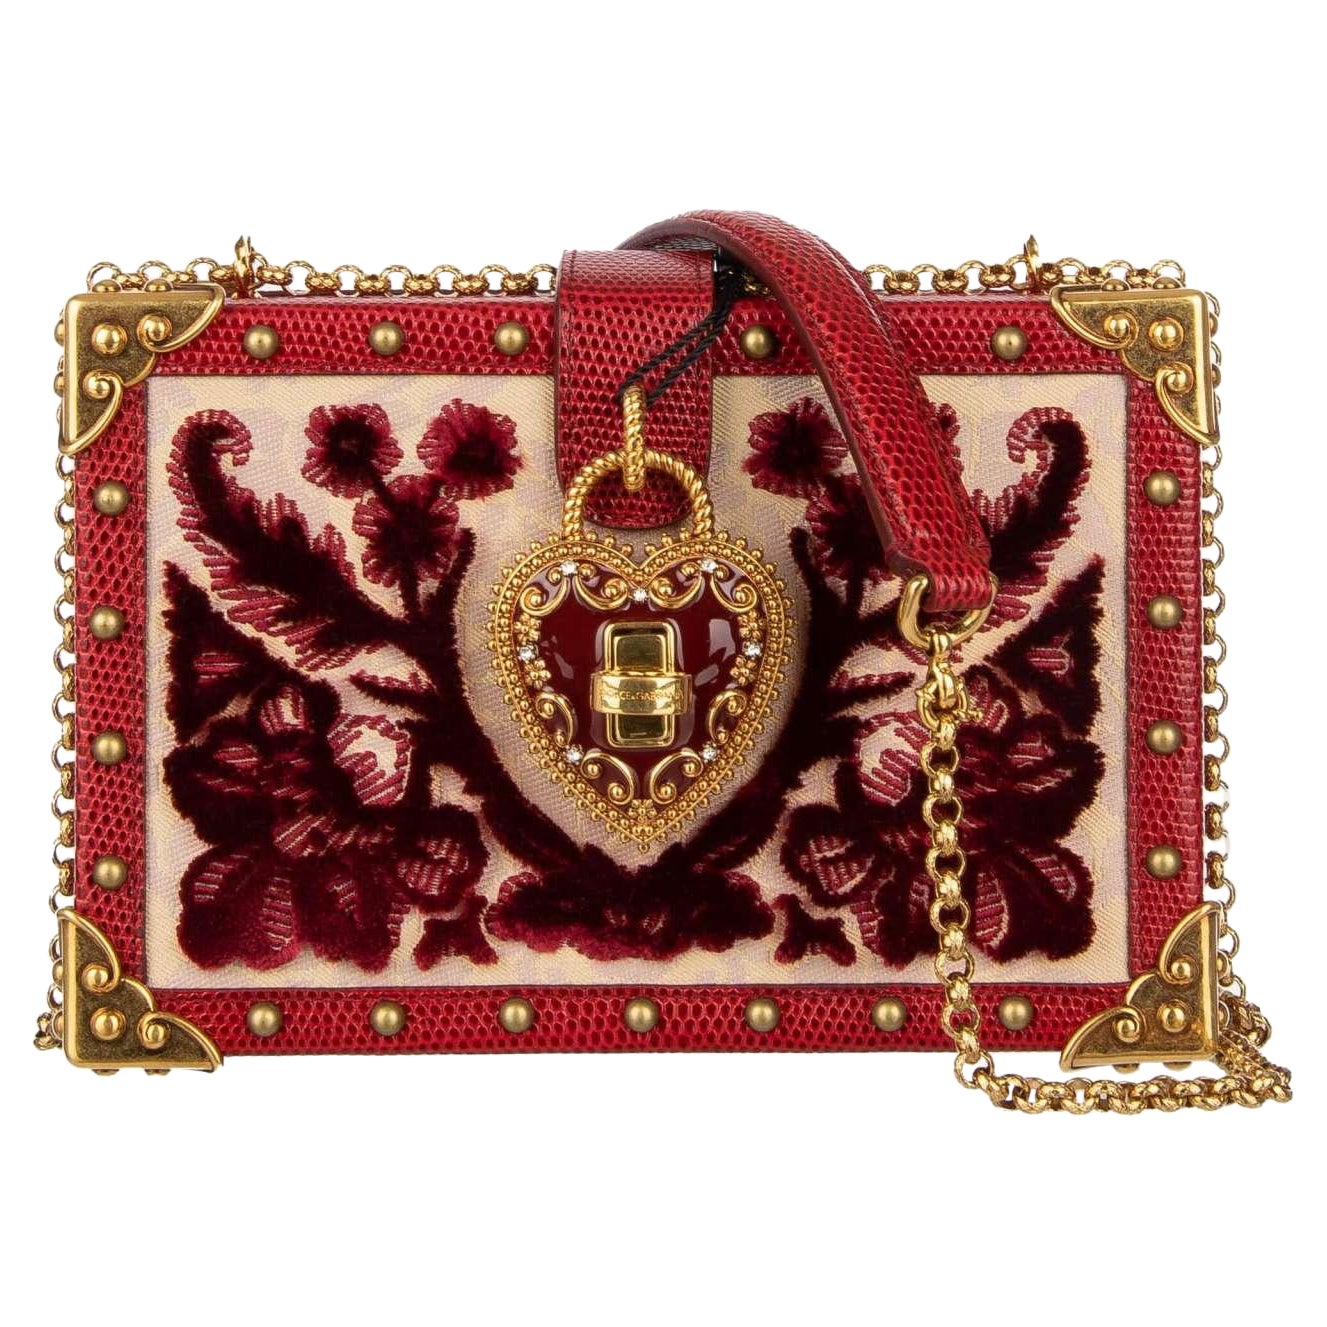 D&G - Velvet Brocade Leather Clutch Box Bag MY HEART with Studs